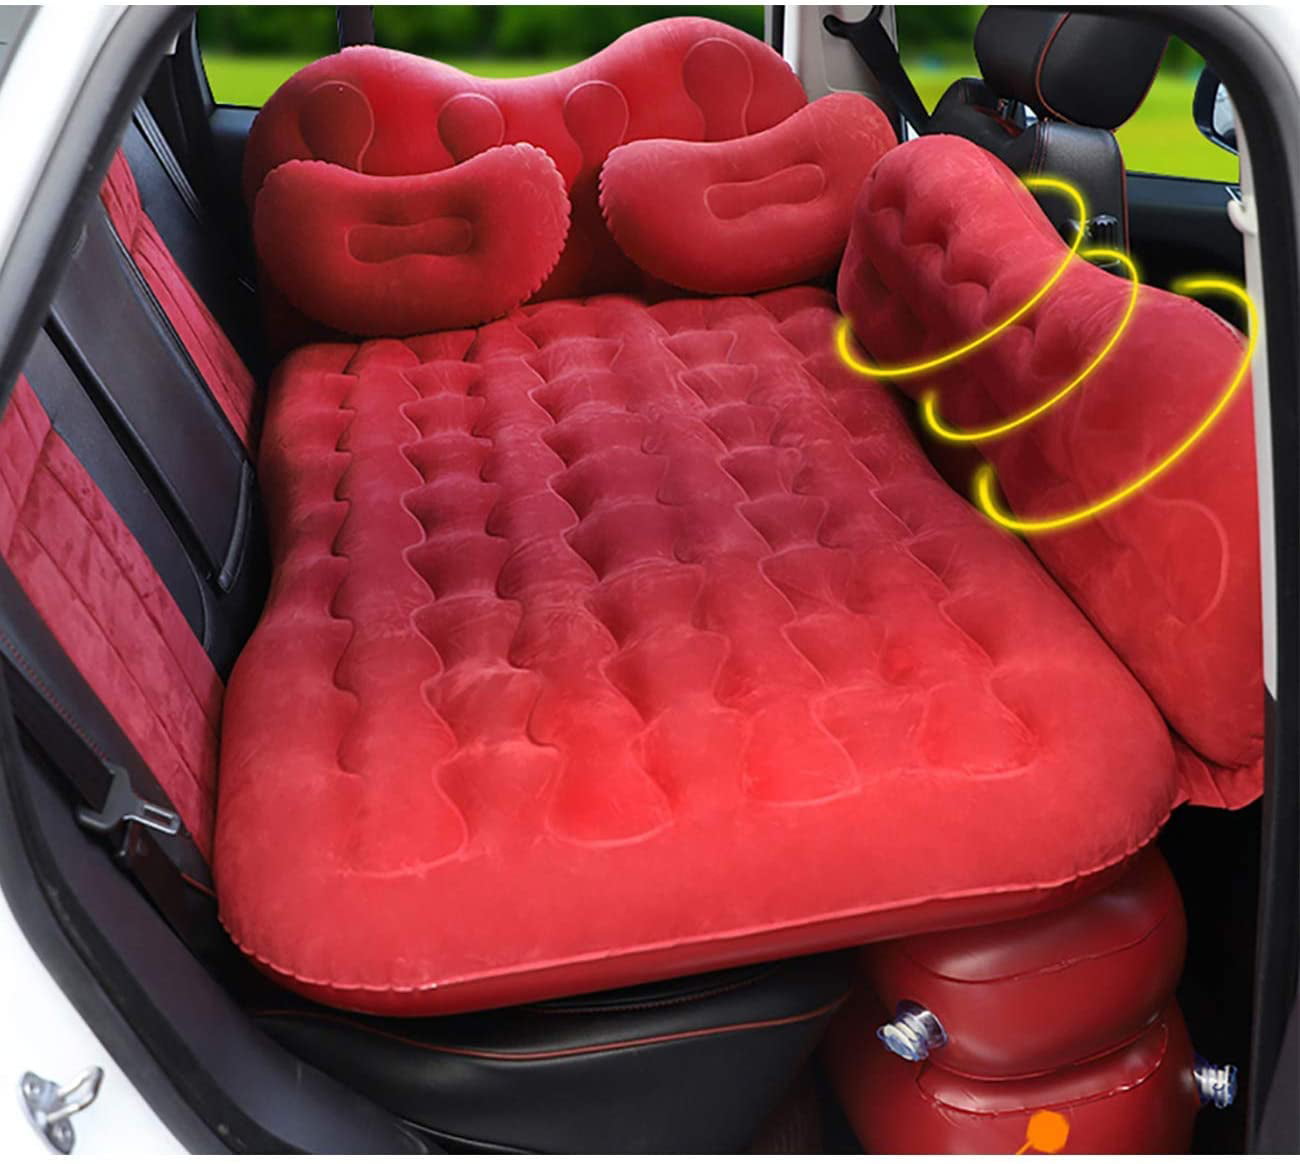 Car Bed fits Car -Camping Inflation Bed Travel Air Bed Car Back Seat-Blow Up Air Mattress CALOER Thickened Inflatable Car Air Mattress with Pocket,Headboard,Pillows and Air Pump SUV. Portable 